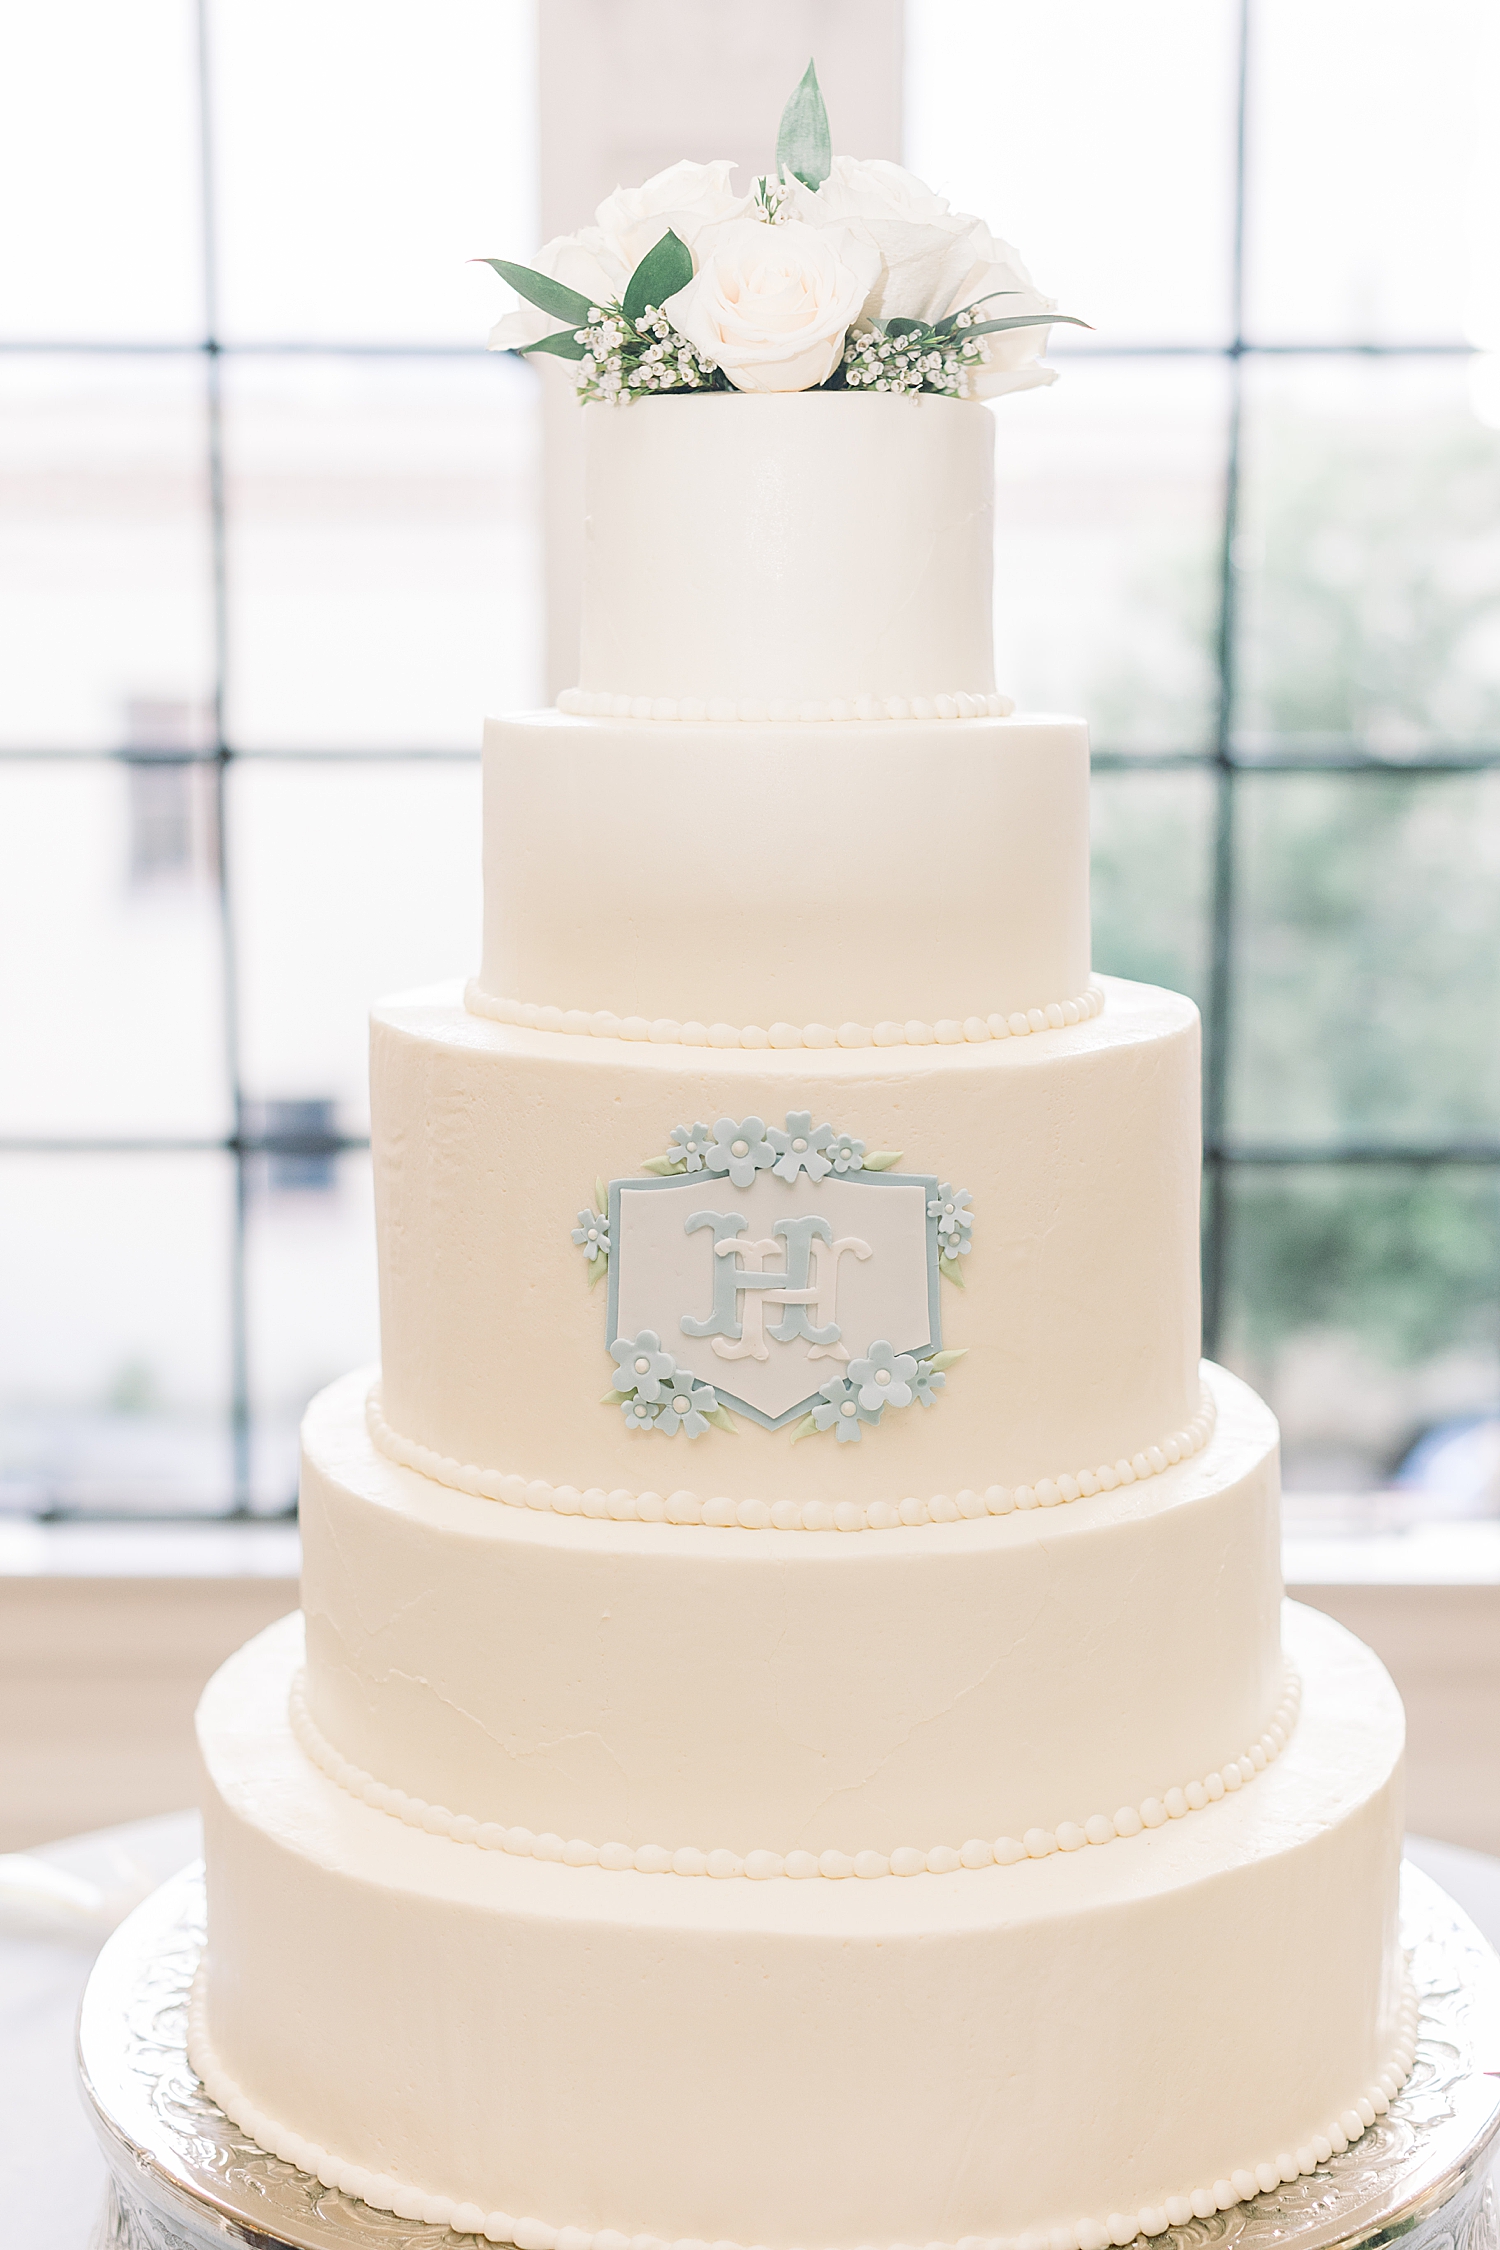 classic wedding cake with light blue details at The Florentine Building wedding reception